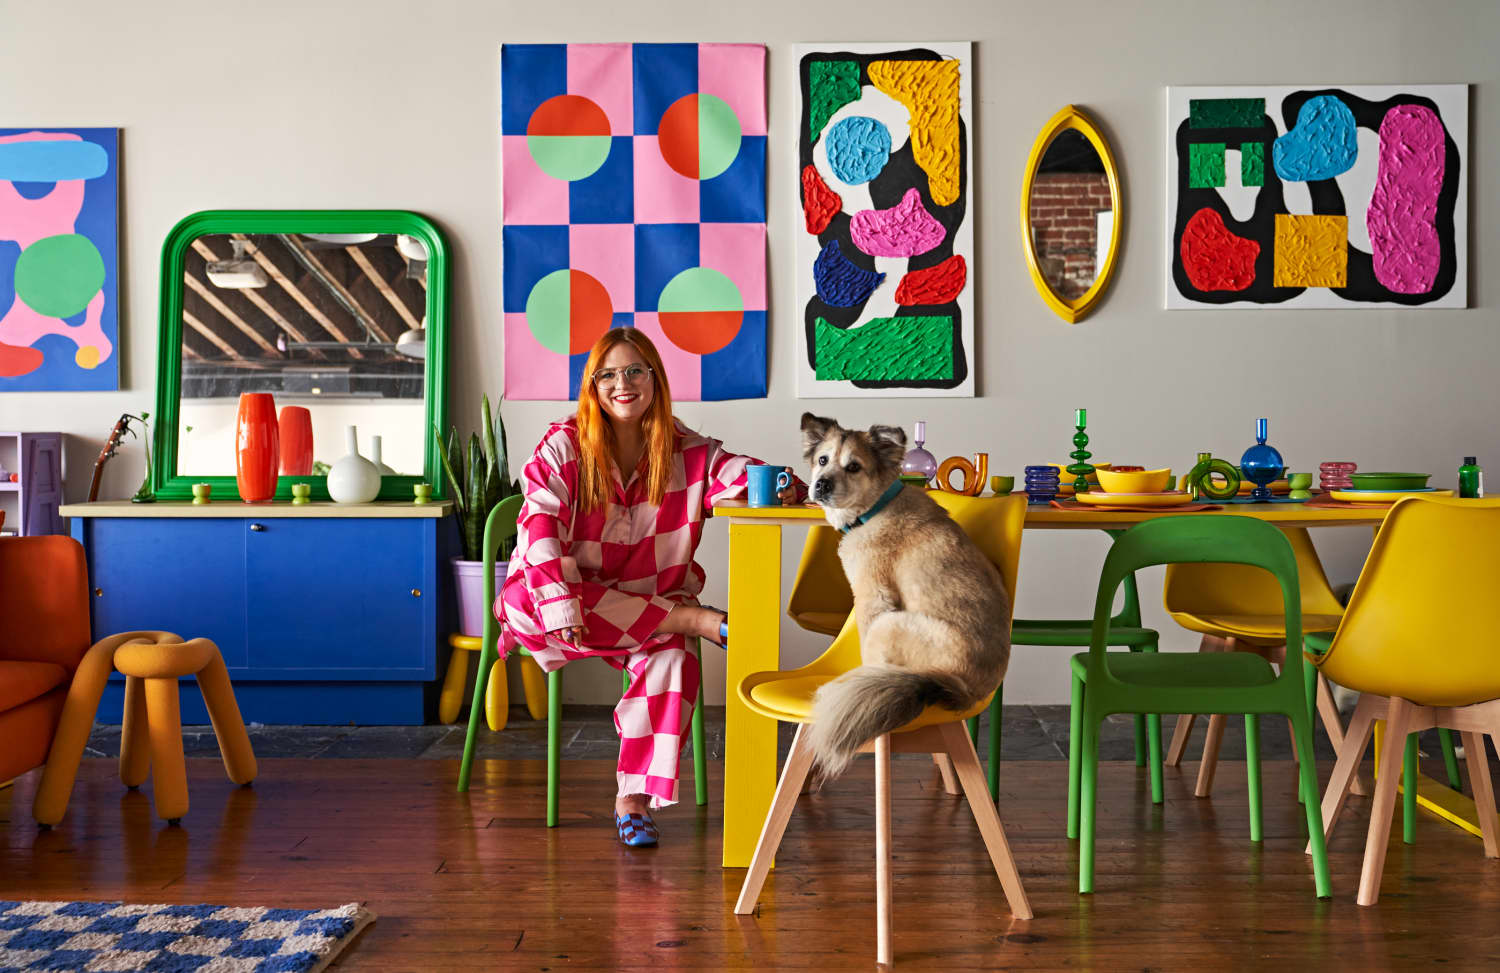 This Polychromatic Loft Is Proof You Can Have a Colorful Home on a Budget